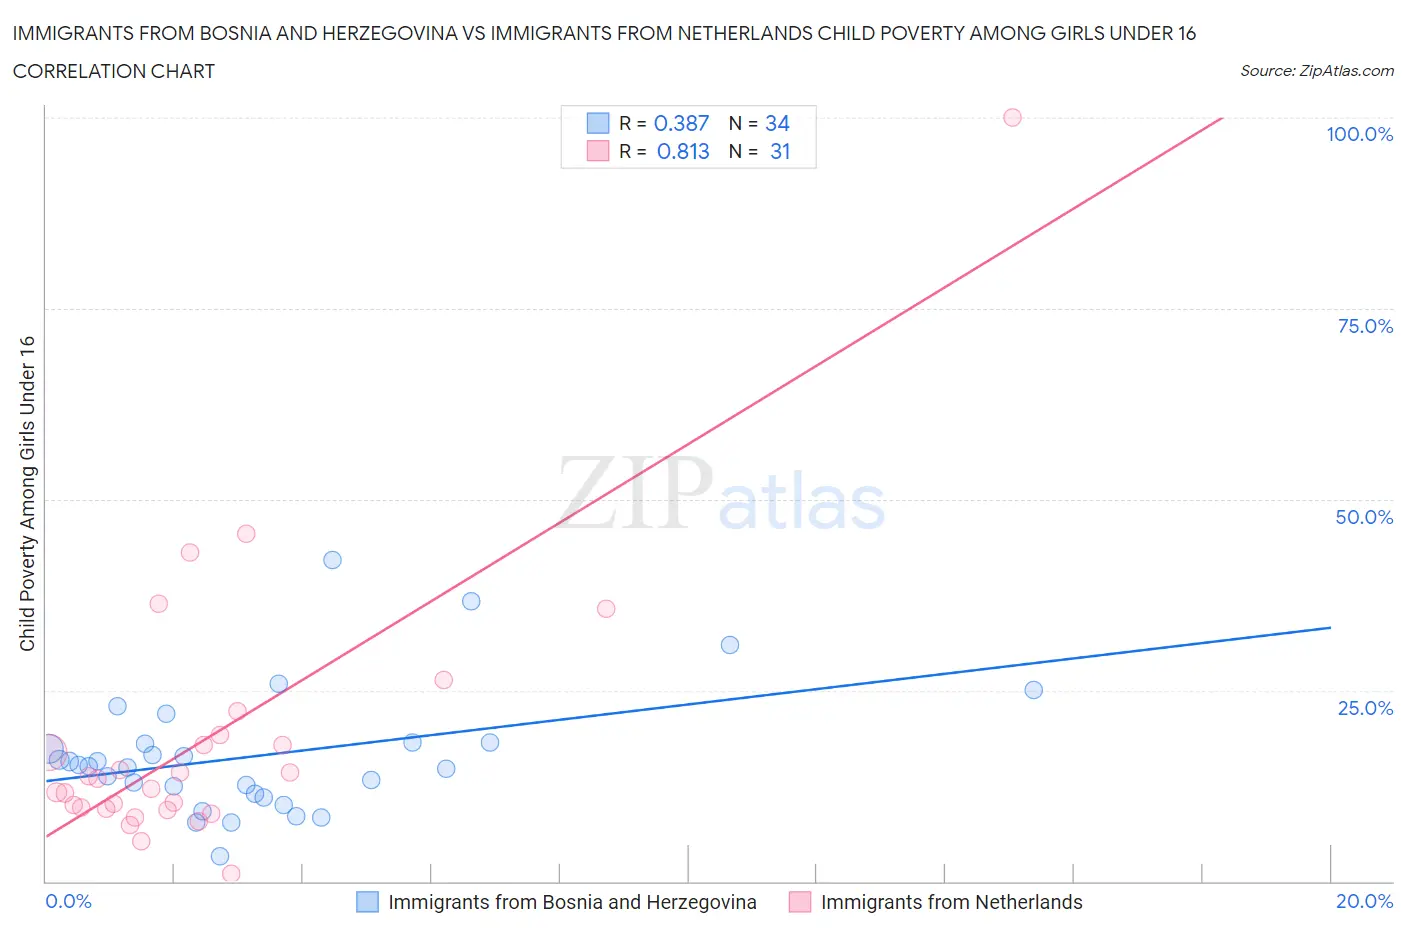 Immigrants from Bosnia and Herzegovina vs Immigrants from Netherlands Child Poverty Among Girls Under 16